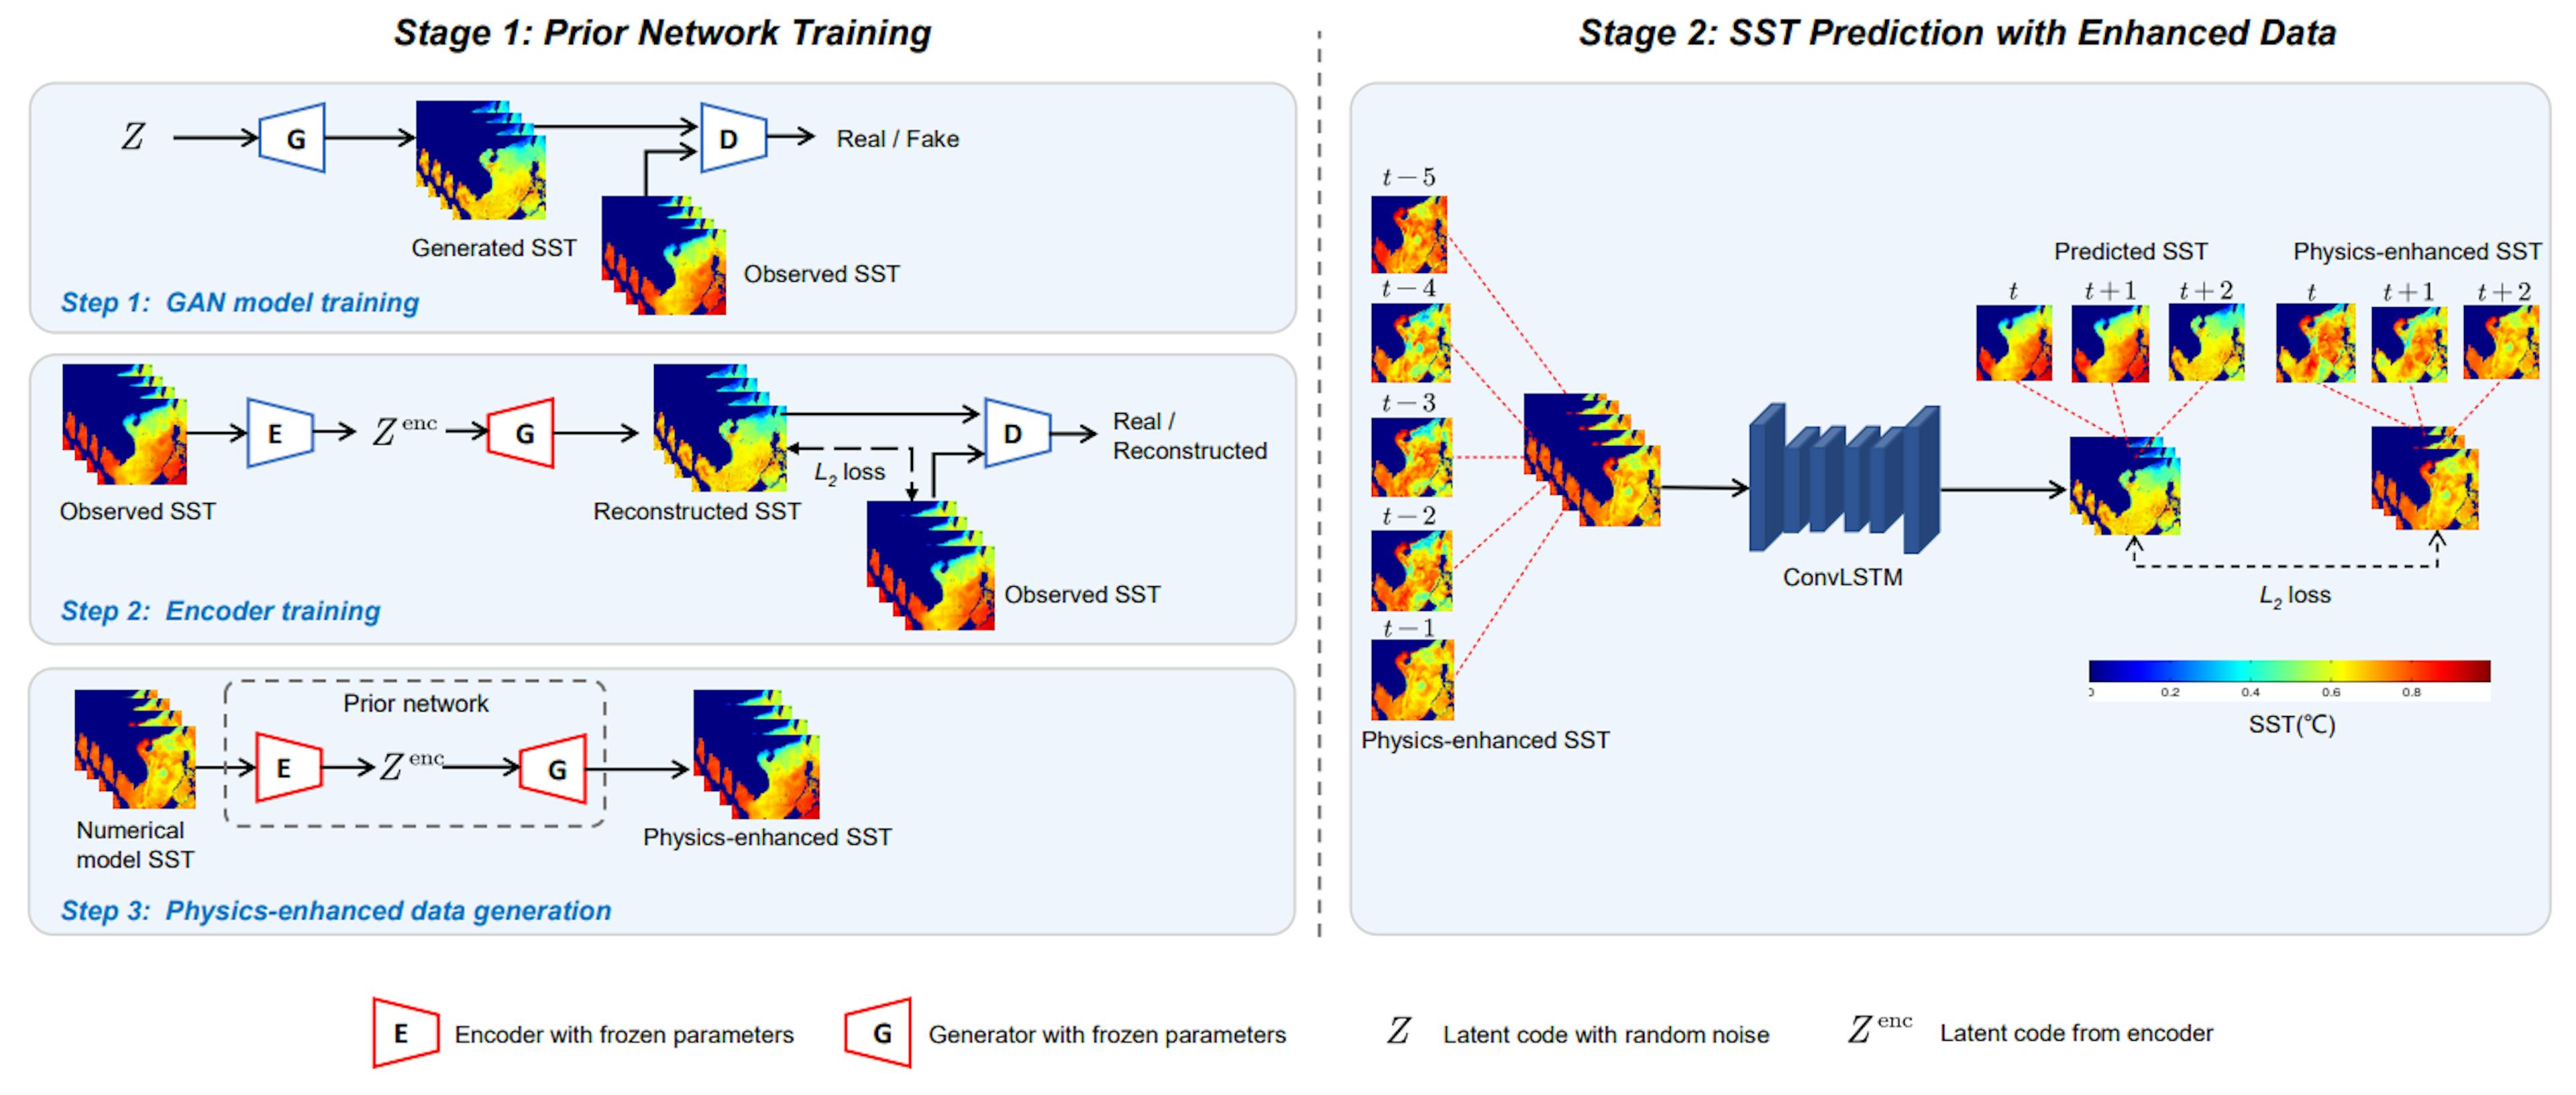 Fig. 2. Illustration of the proposed SST prediction method. It consists of two stages: Prior network training and SST prediction with enhanced data. In the first stage, a prior network is trained to generate physics-enhanced SST. In the second stage, the physics-enhanced SST are used for SST prediction via ConvLSTM.